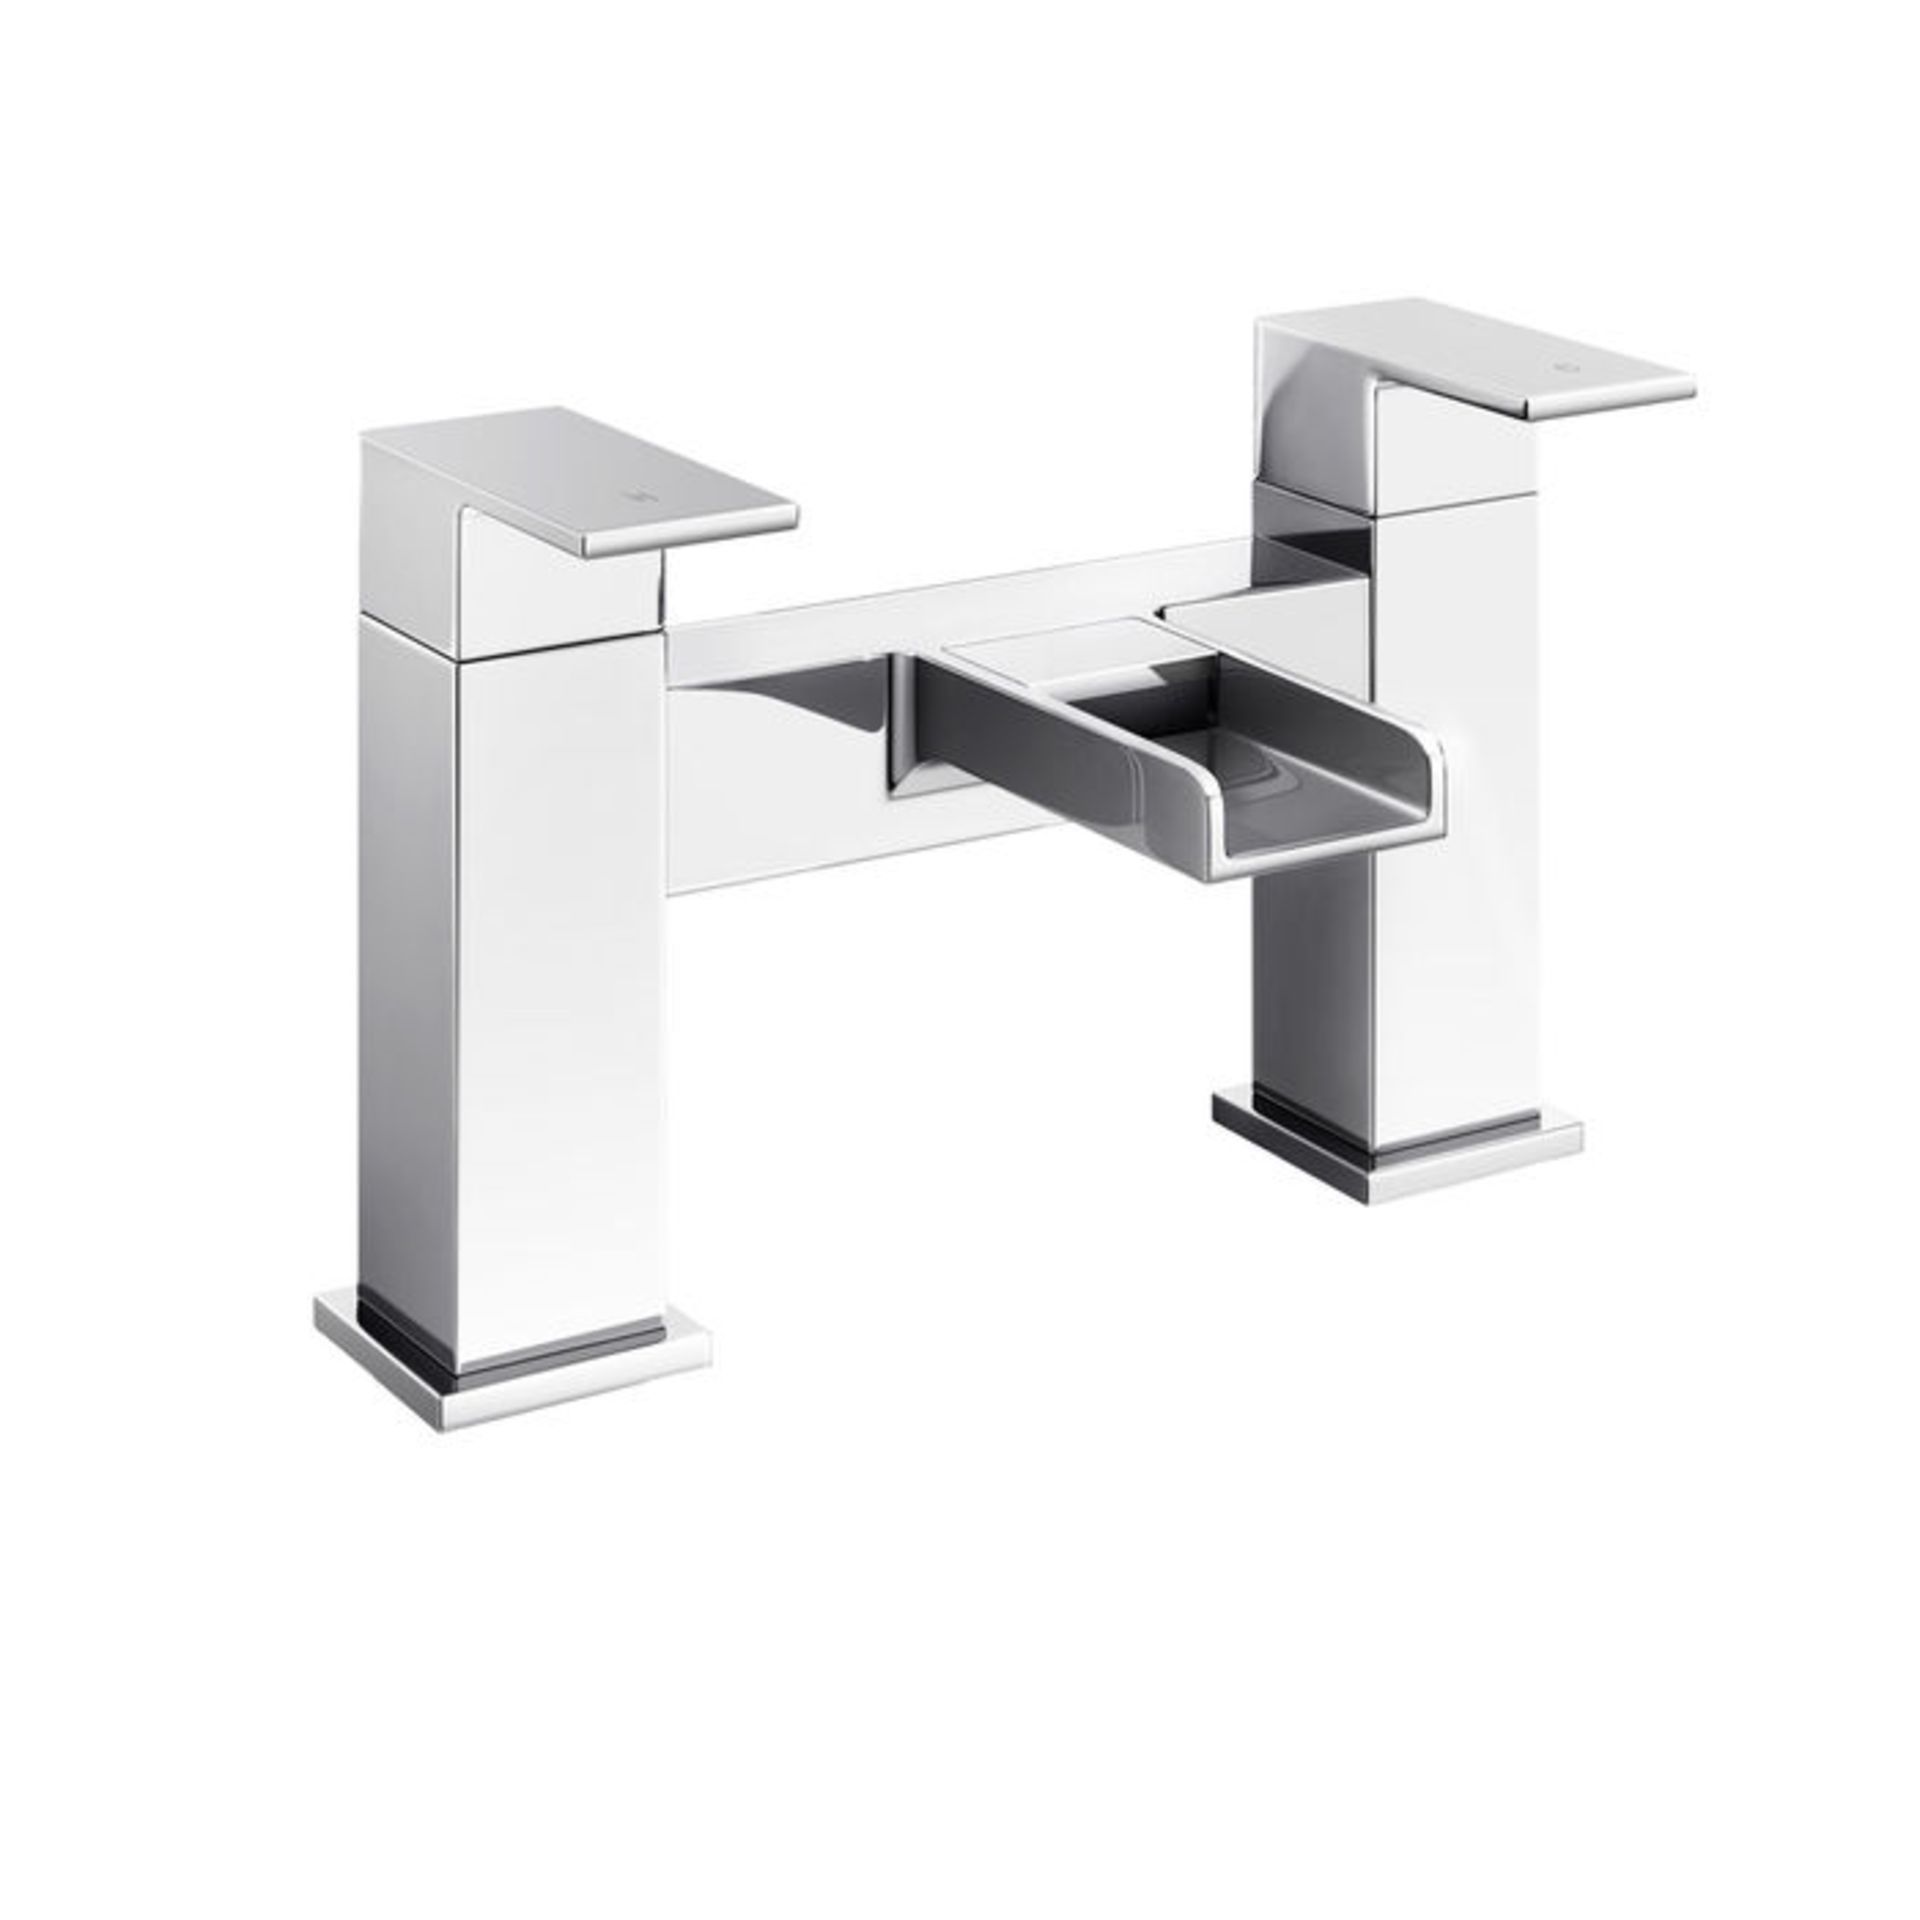 New & Boxed Niagra Waterfall Bath Mixer Taps. Tb3108.Chrome Plated Solid Brass 1/4 Turn Solid B... - Image 2 of 2